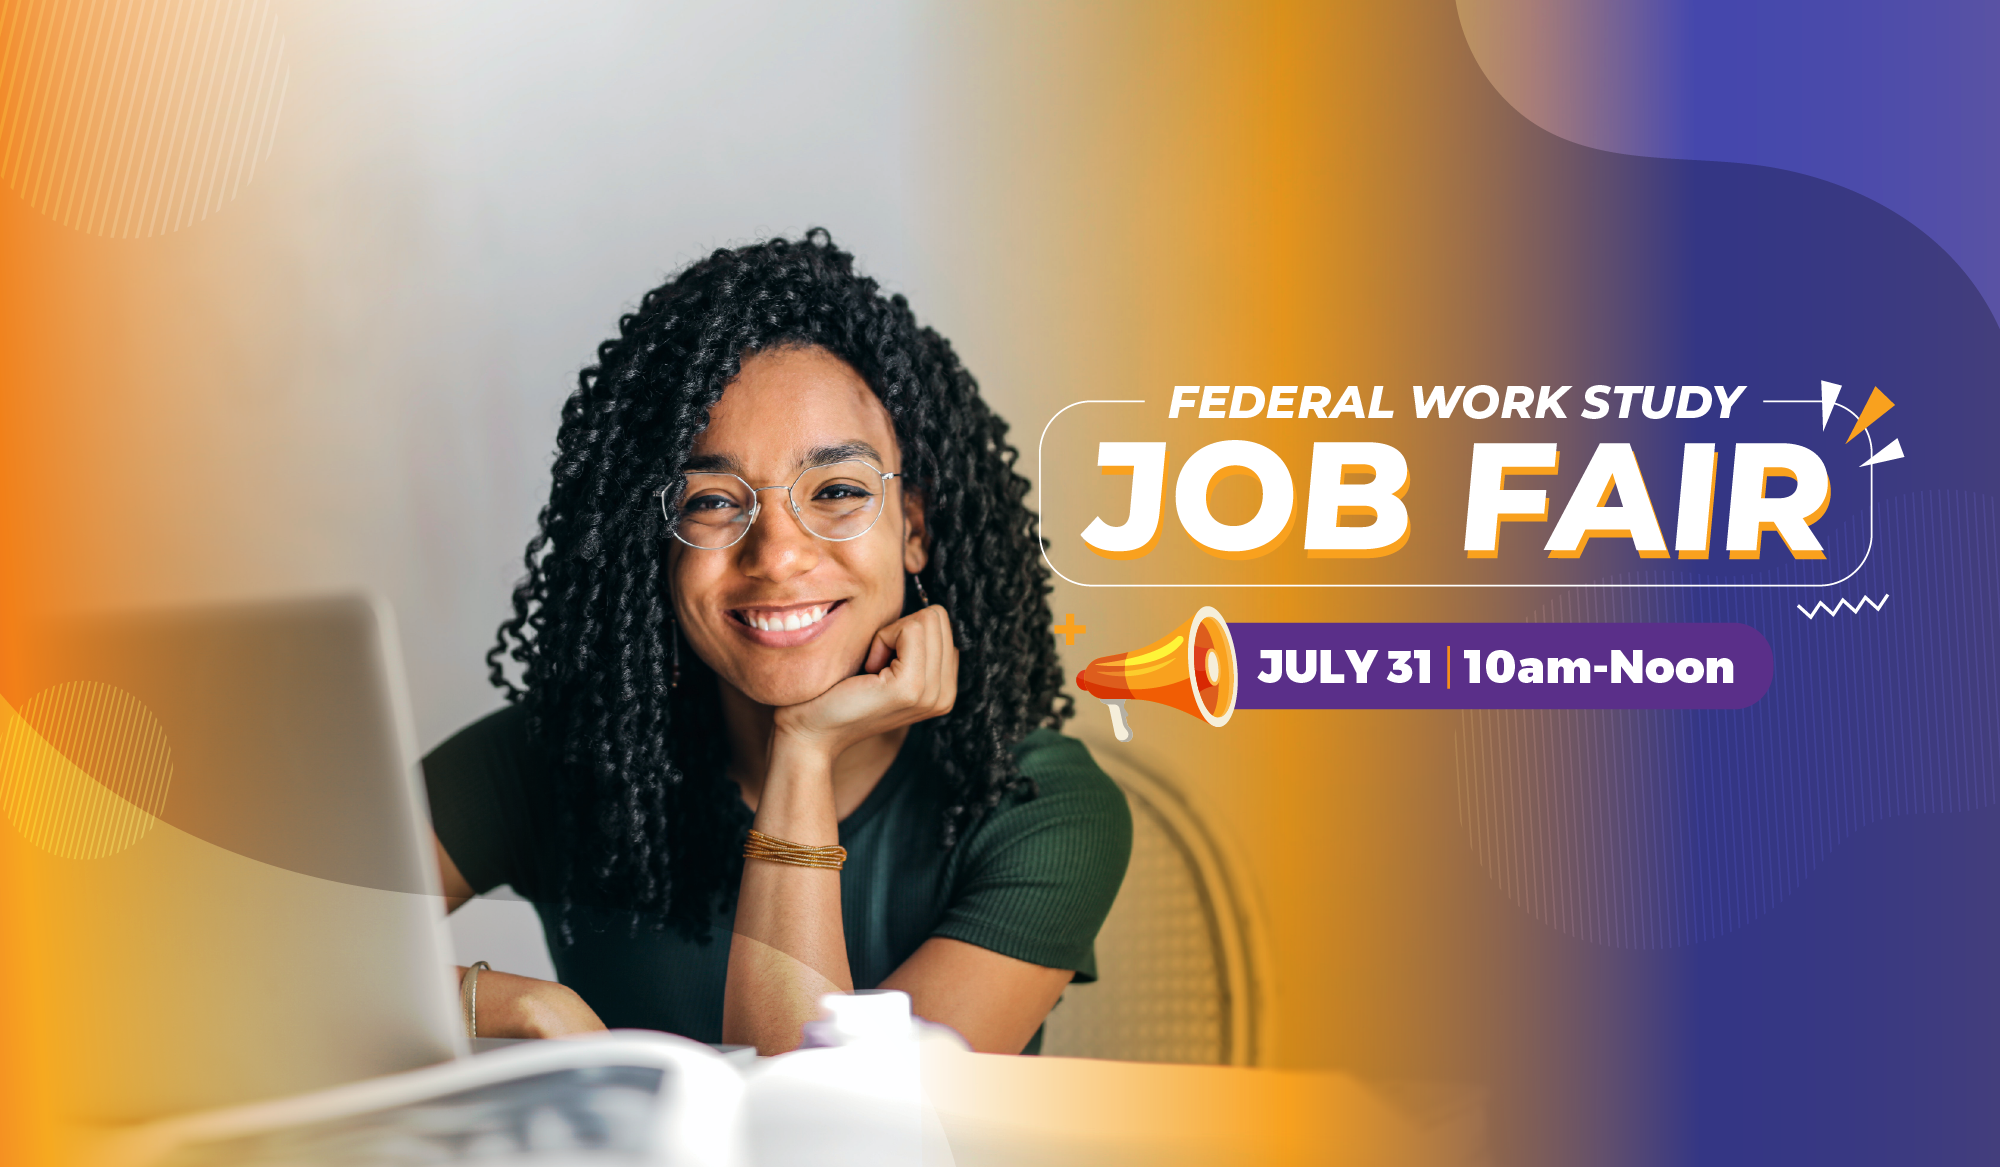 federal work study job fair july 31 10am to noon